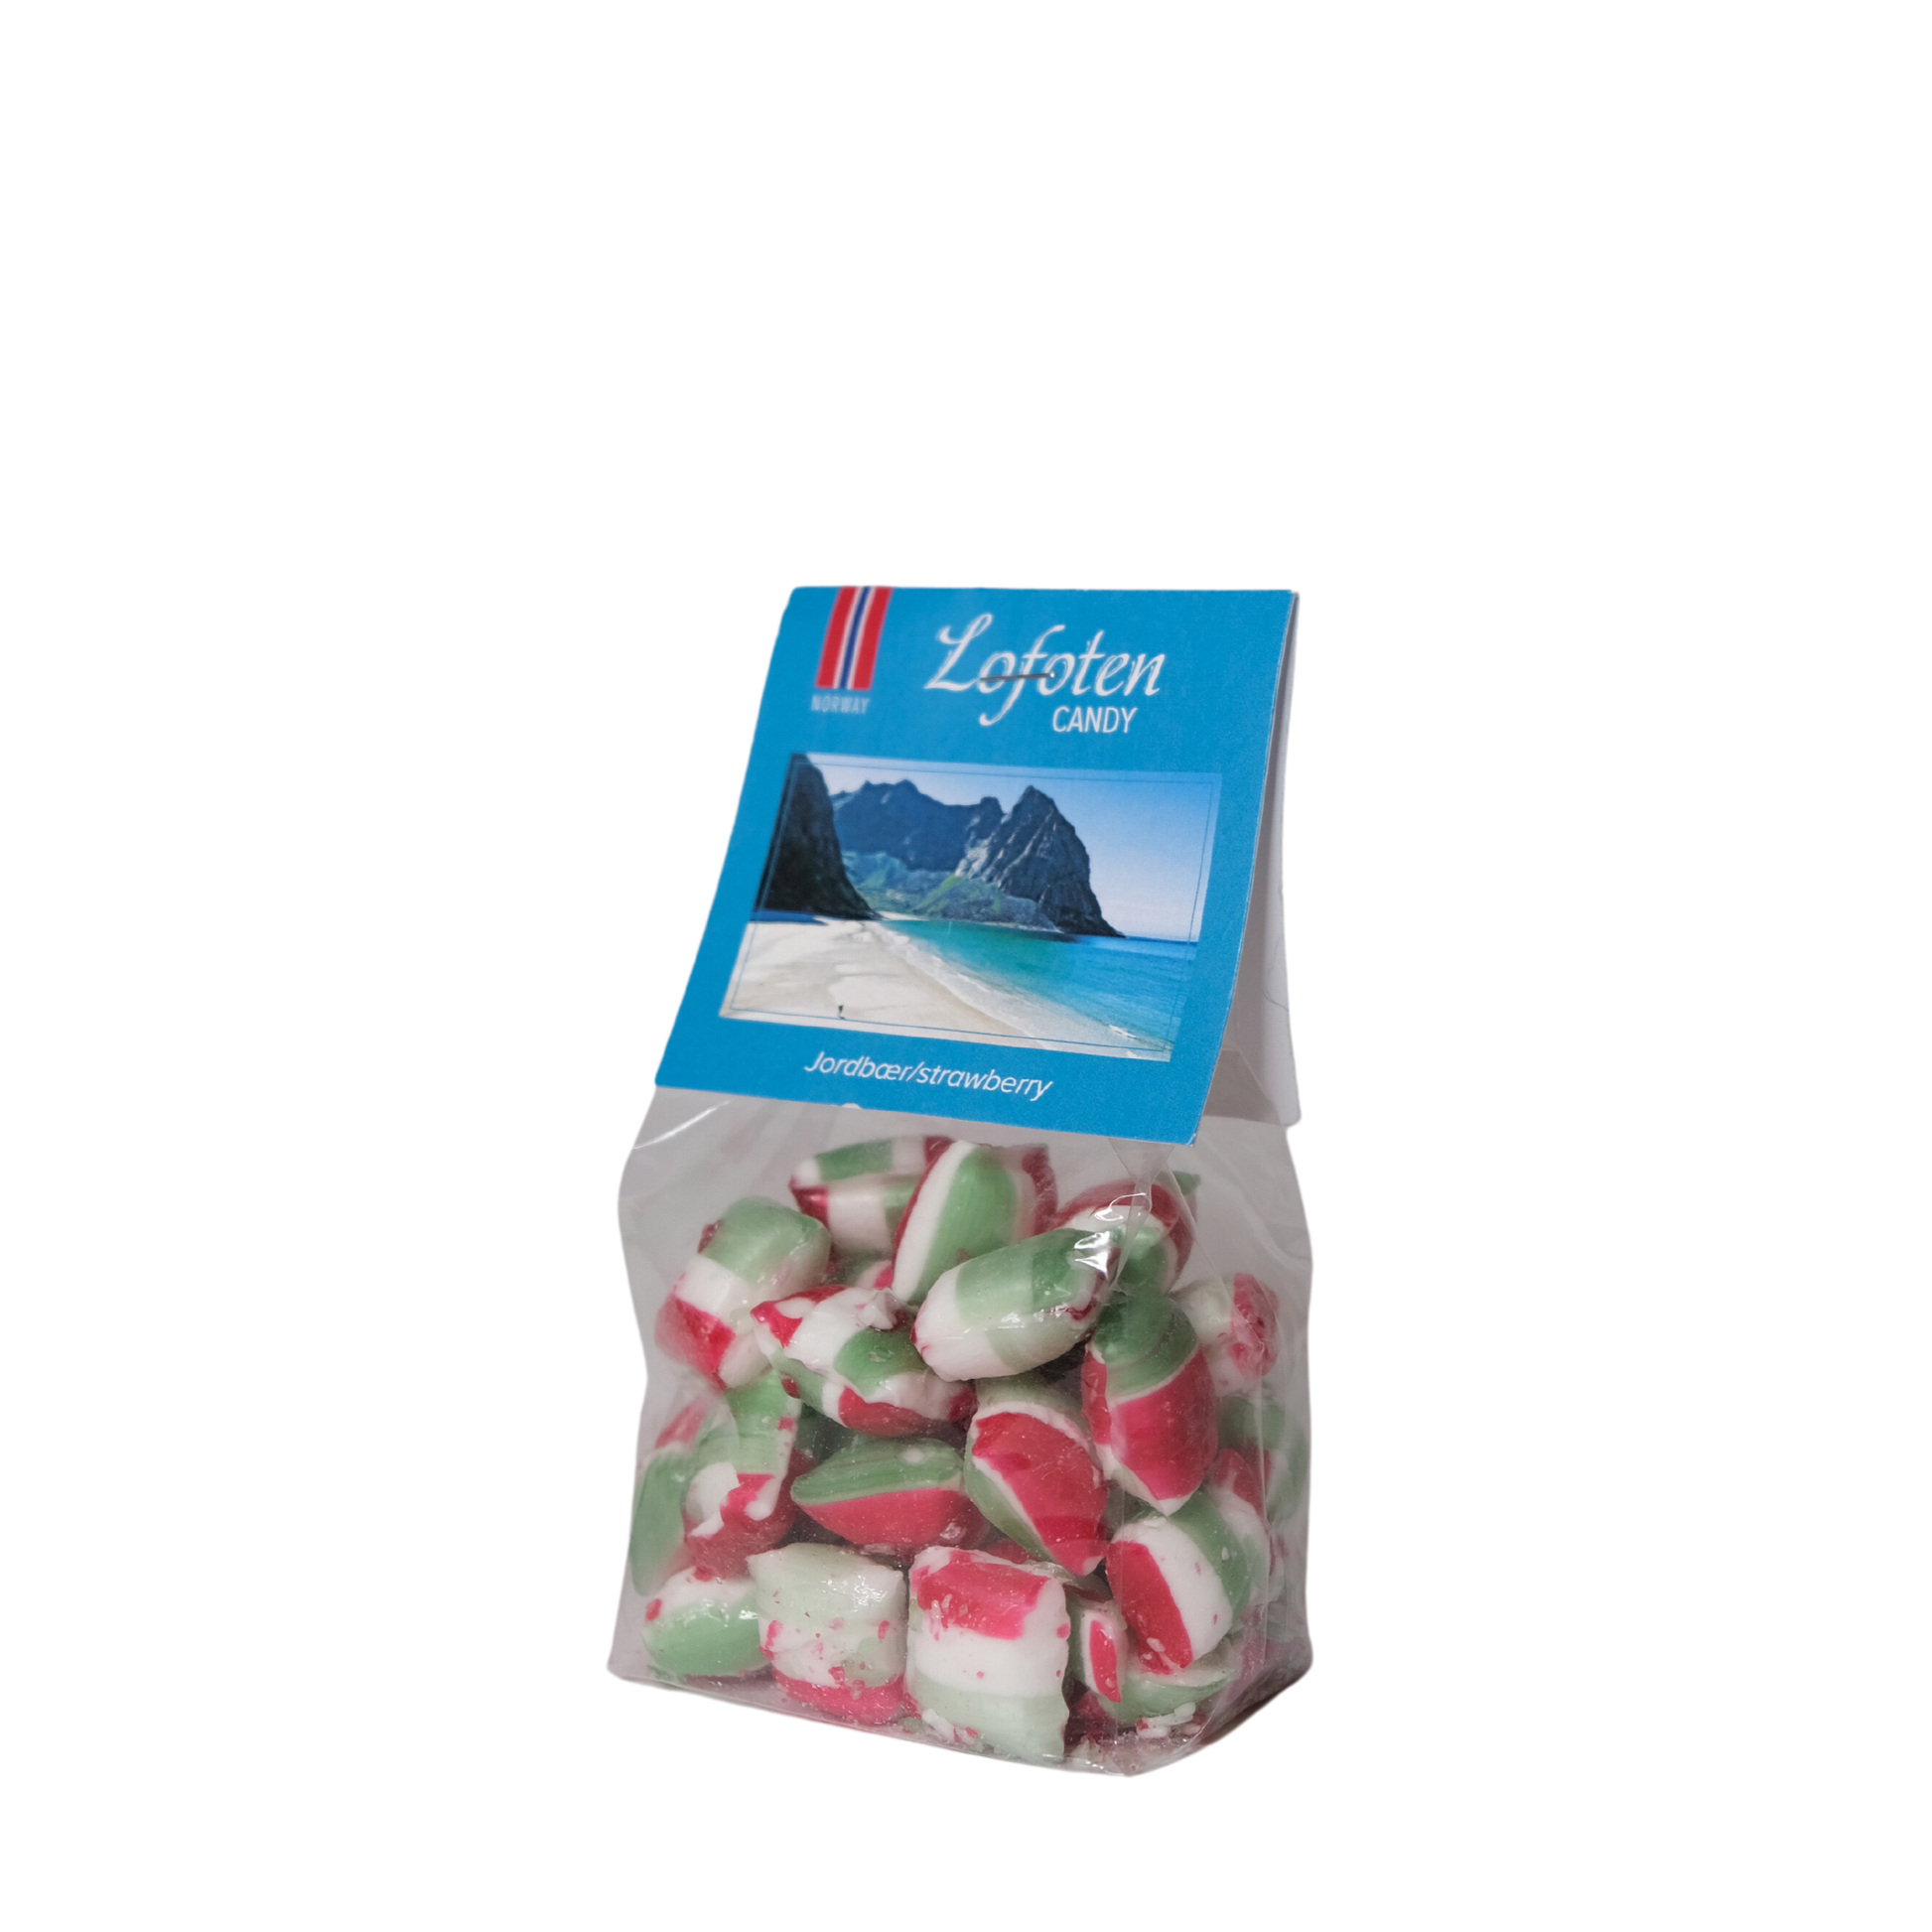 Lofoten candy with strawberry flavor